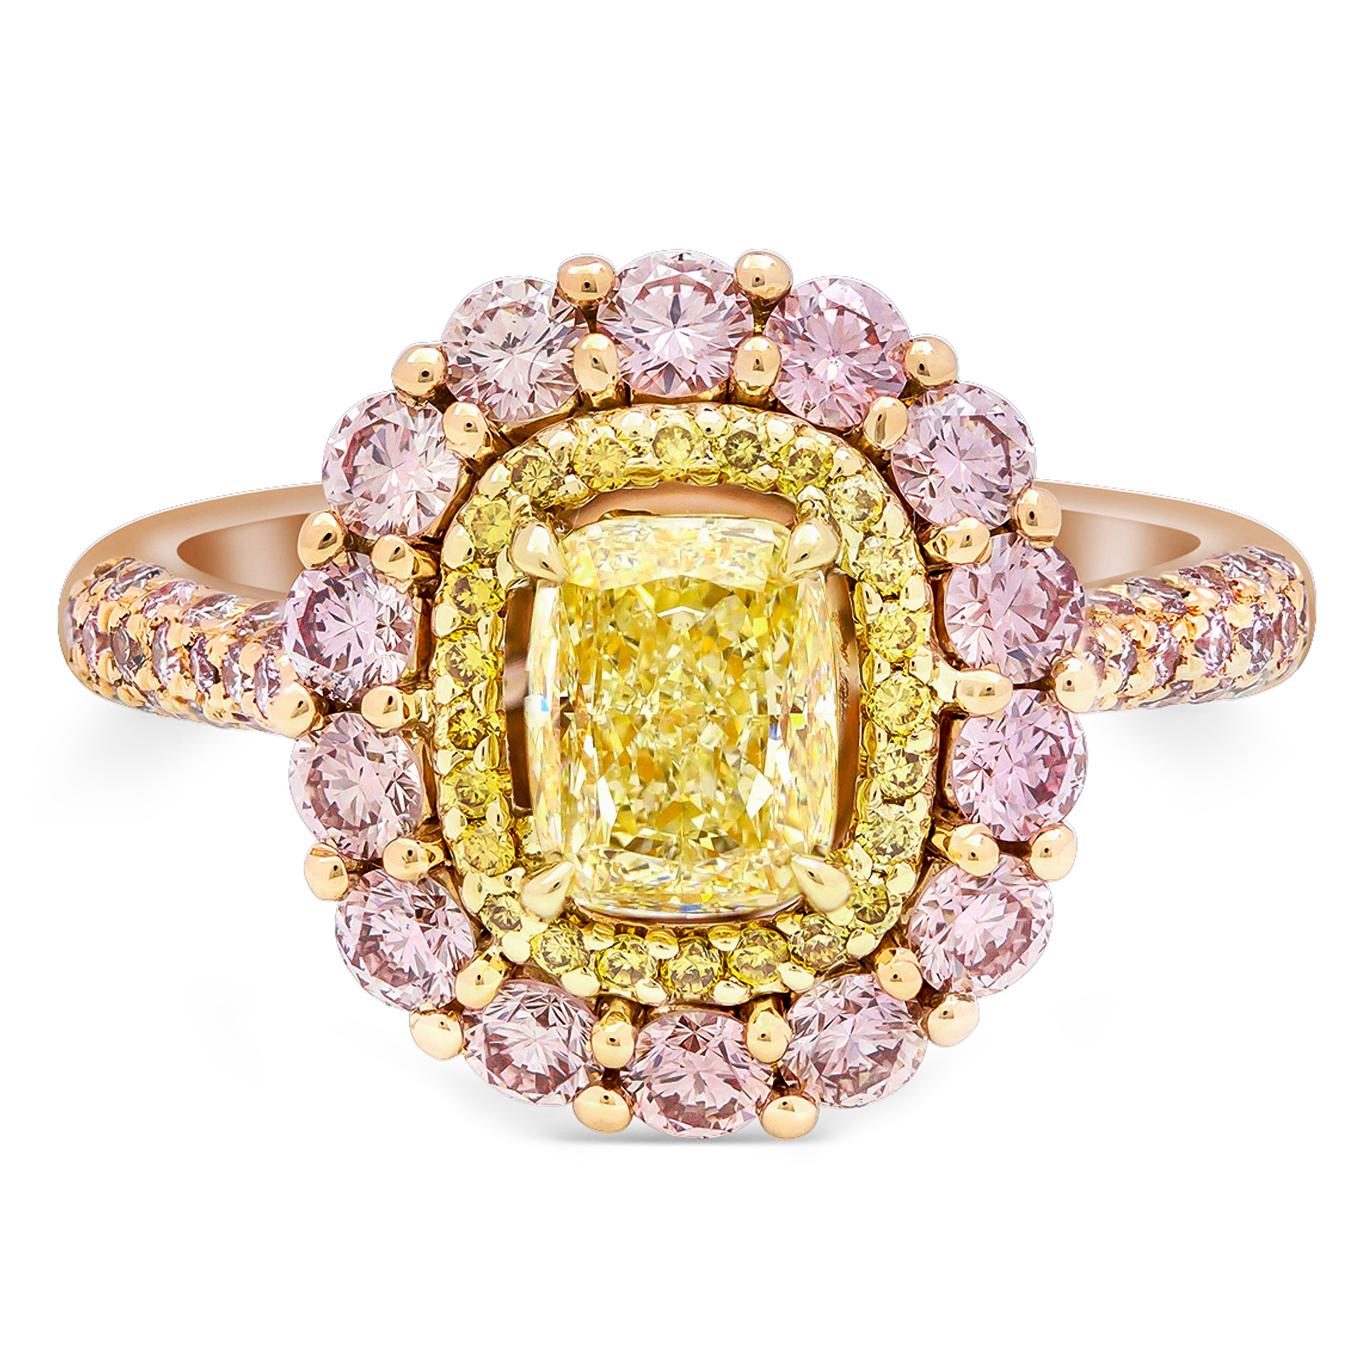 A color-rich and vibrant double halo engagement ring featuring 1.01 carats cushion cut diamond center stone that GIA certified as Fancy Yellow color and set in a yellow gold four prong basket setting. Surrounded by a double row of brilliant round